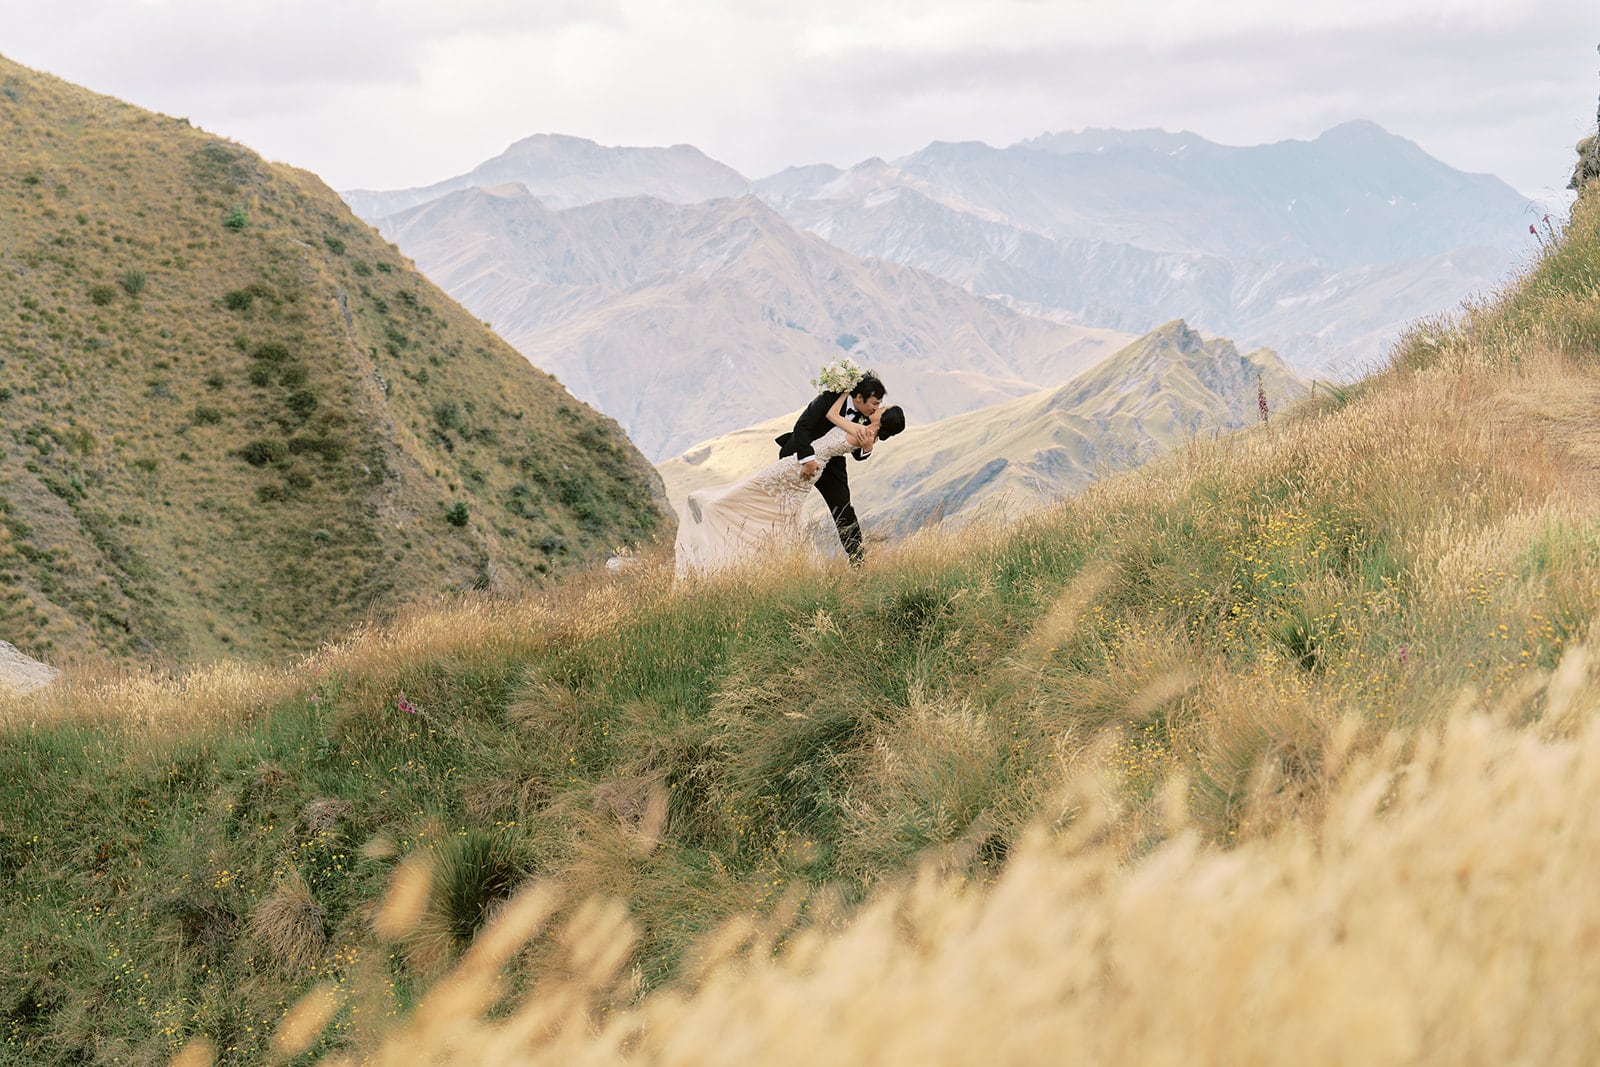 Queenstown New Zealand Heli Wedding Elopement Photographer クイーンズタウン　ニュージーランド　エロープメント 結婚式 | A groom carrying a bride through a grassy hillside with mountains in the background, captured by YURI, a Queenstown Wedding Photographer.